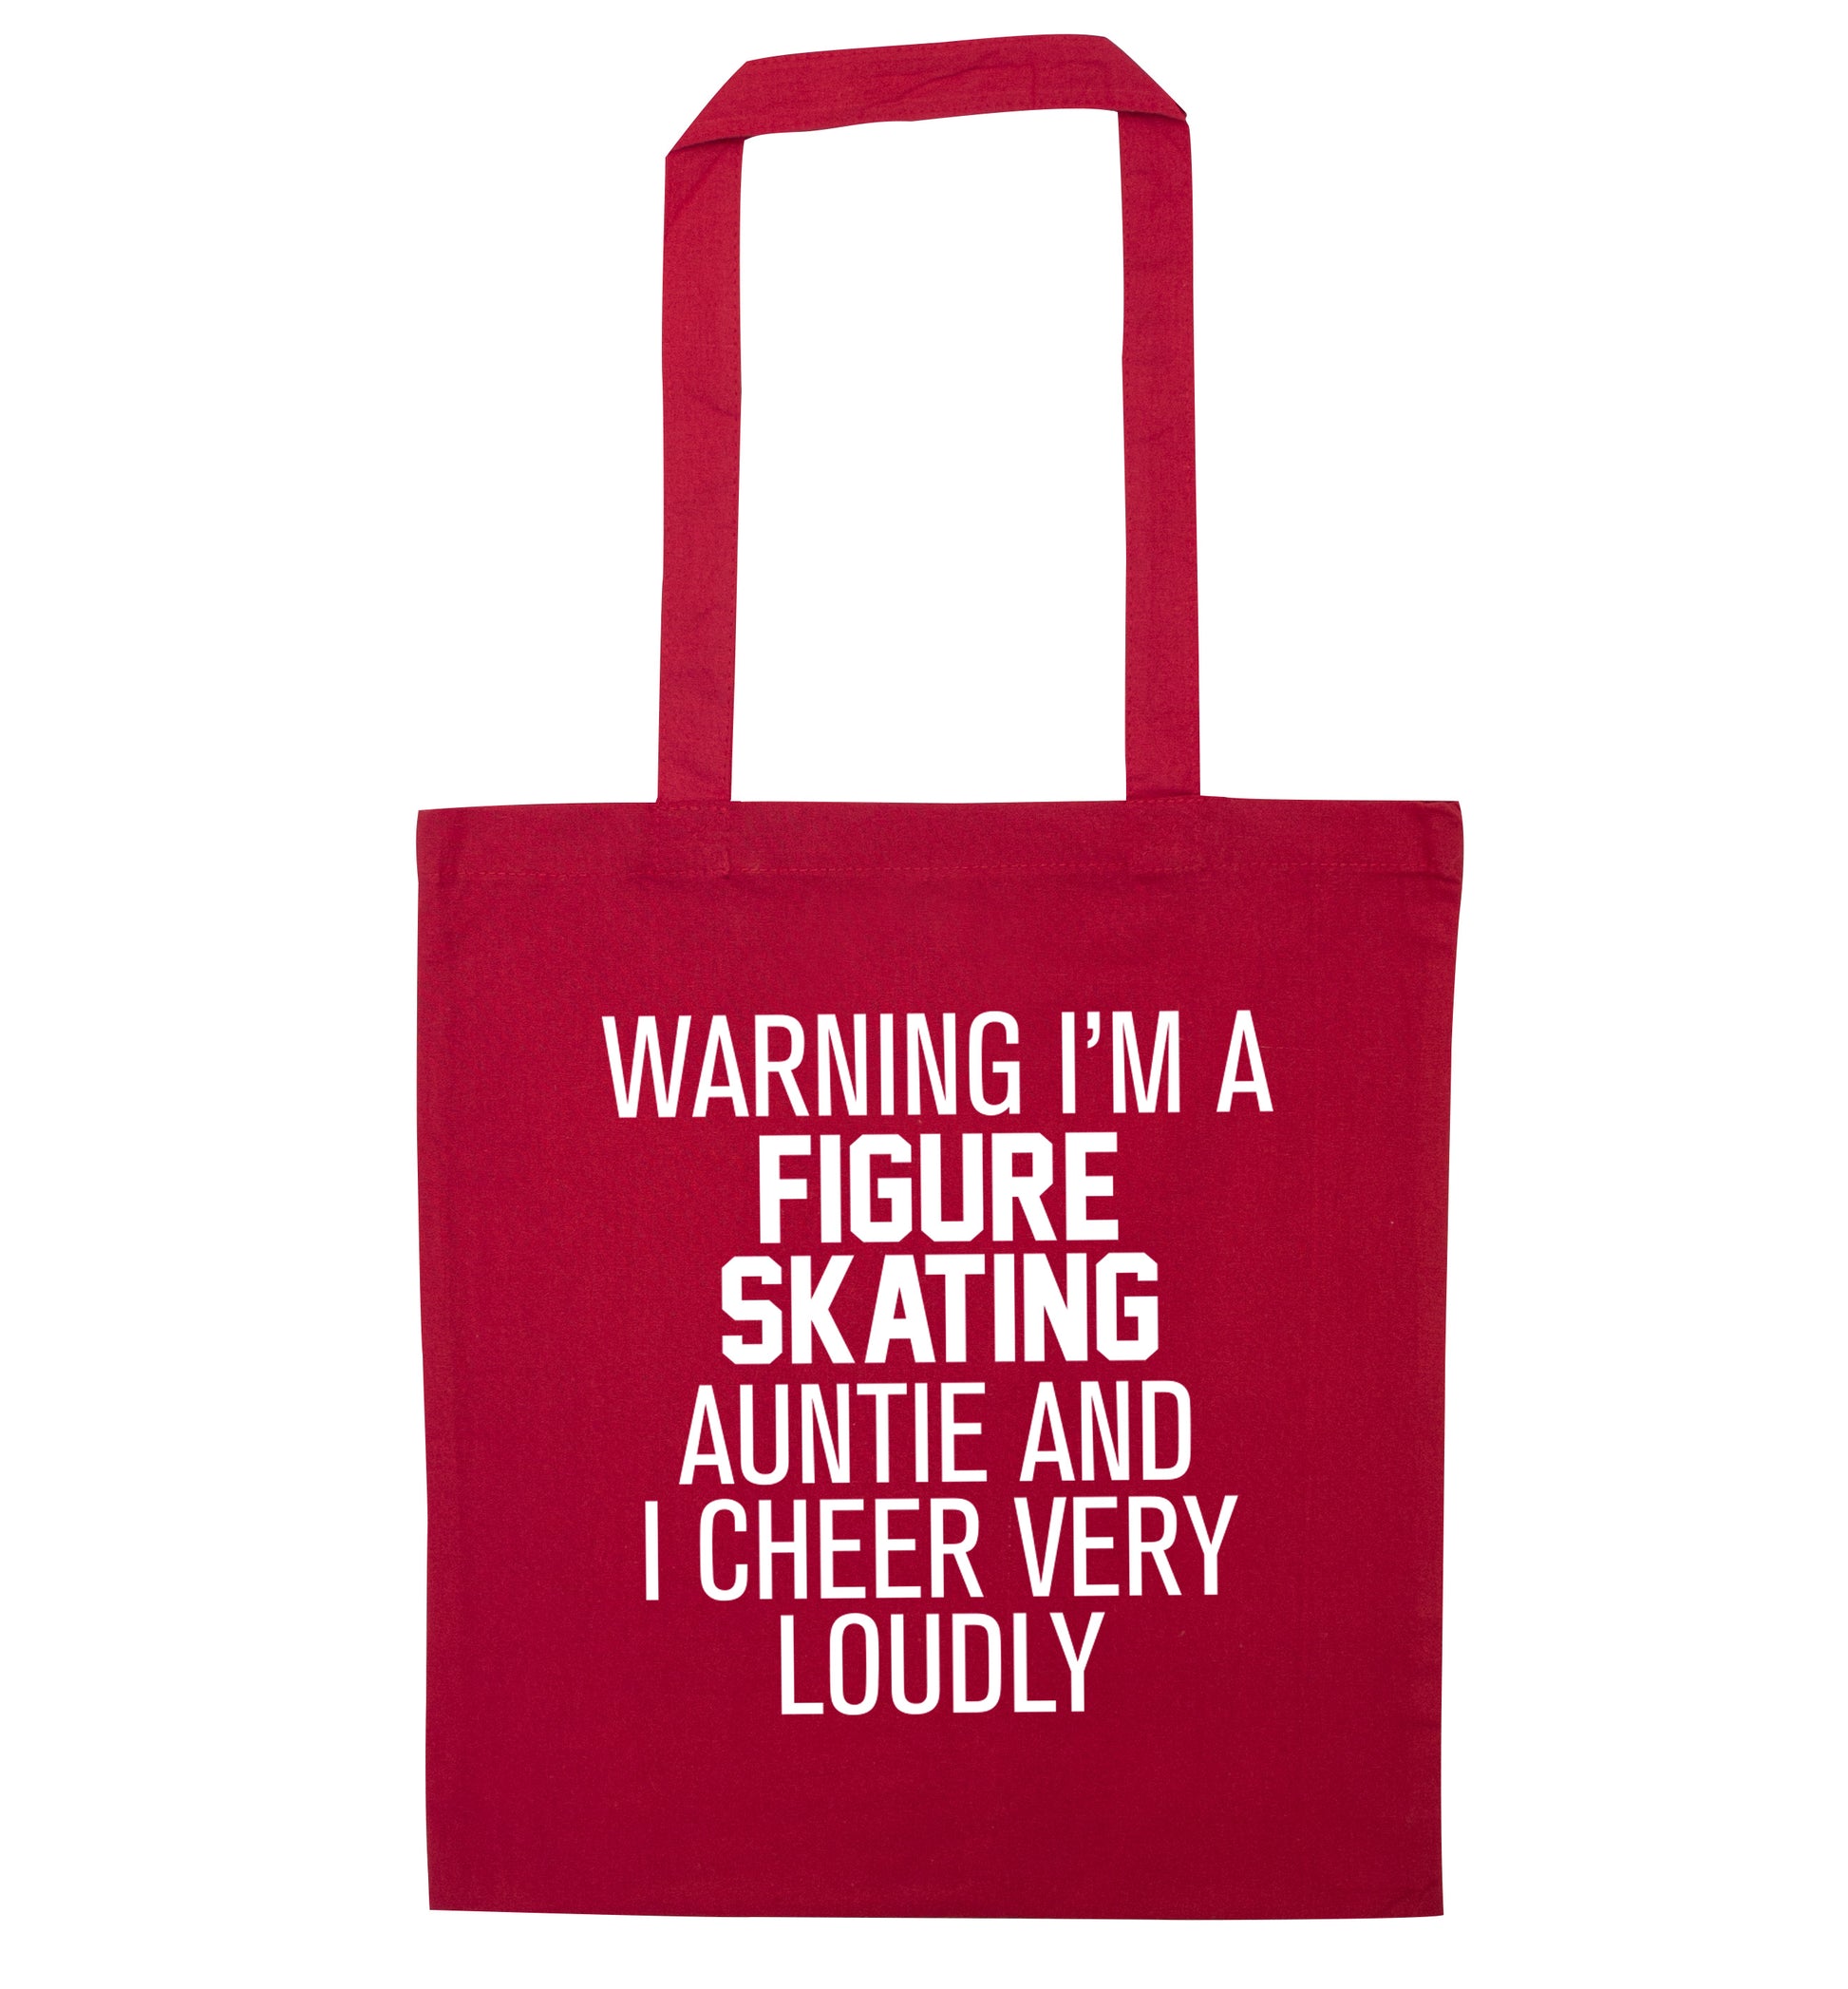 Warning I'm a figure skating auntie and I cheer very loudly red tote bag